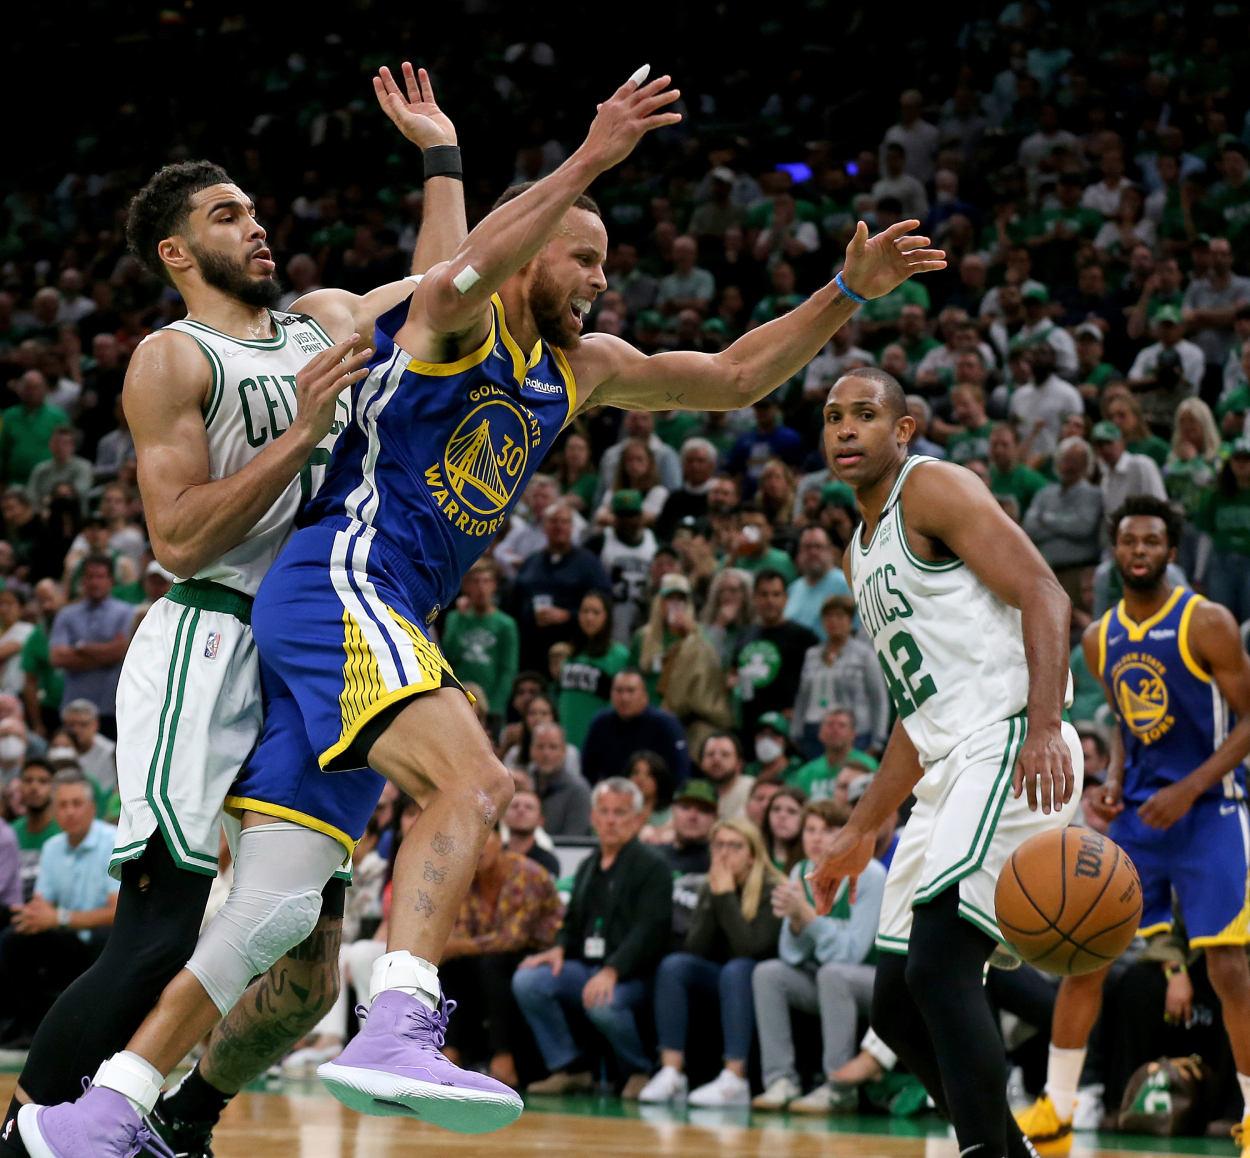 Stephen Curry of the Golden State Warriors loses the ball as Jayson Tatum and Al Horford of the Boston Celtics look on.